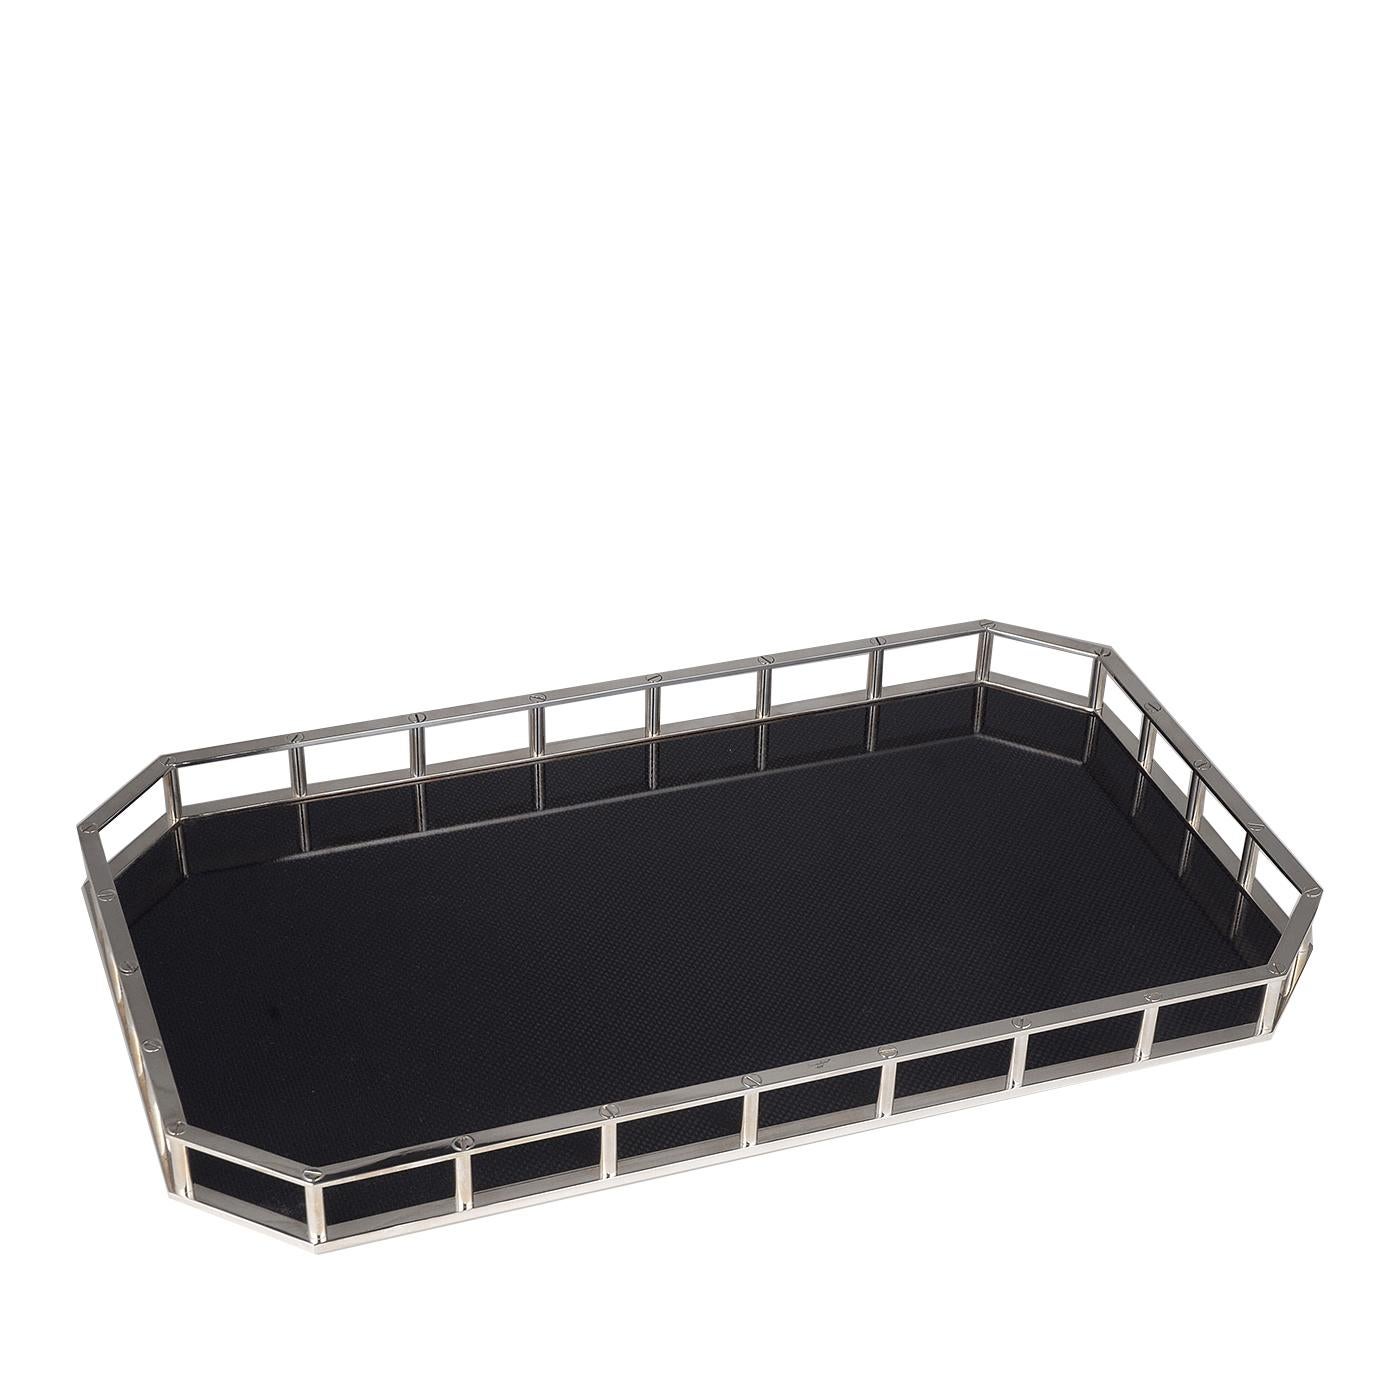 Elegant and modern, this tray is crafted in the shape of an octagon with two elongated sides that gives it a rectangular silhouette. The bottom is entirely lined with carbon fiber whose black tones are a sophisticated backdrop for its silver plated